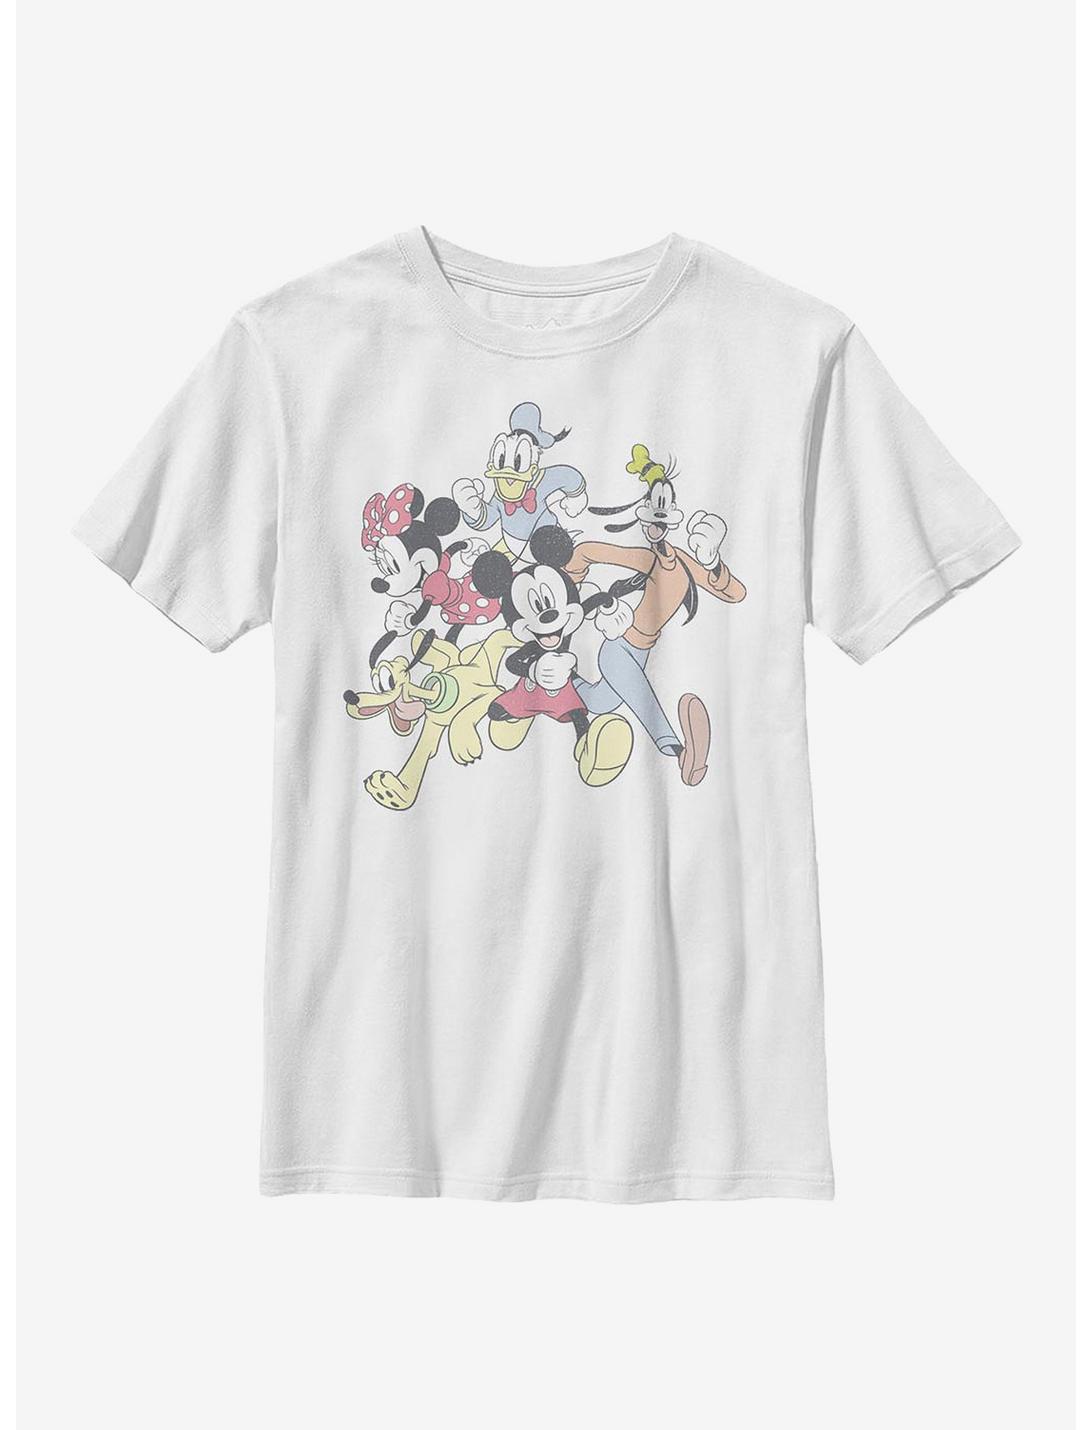 Disney Mickey Mouse Group Run Youth T-Shirt, WHITE, hi-res